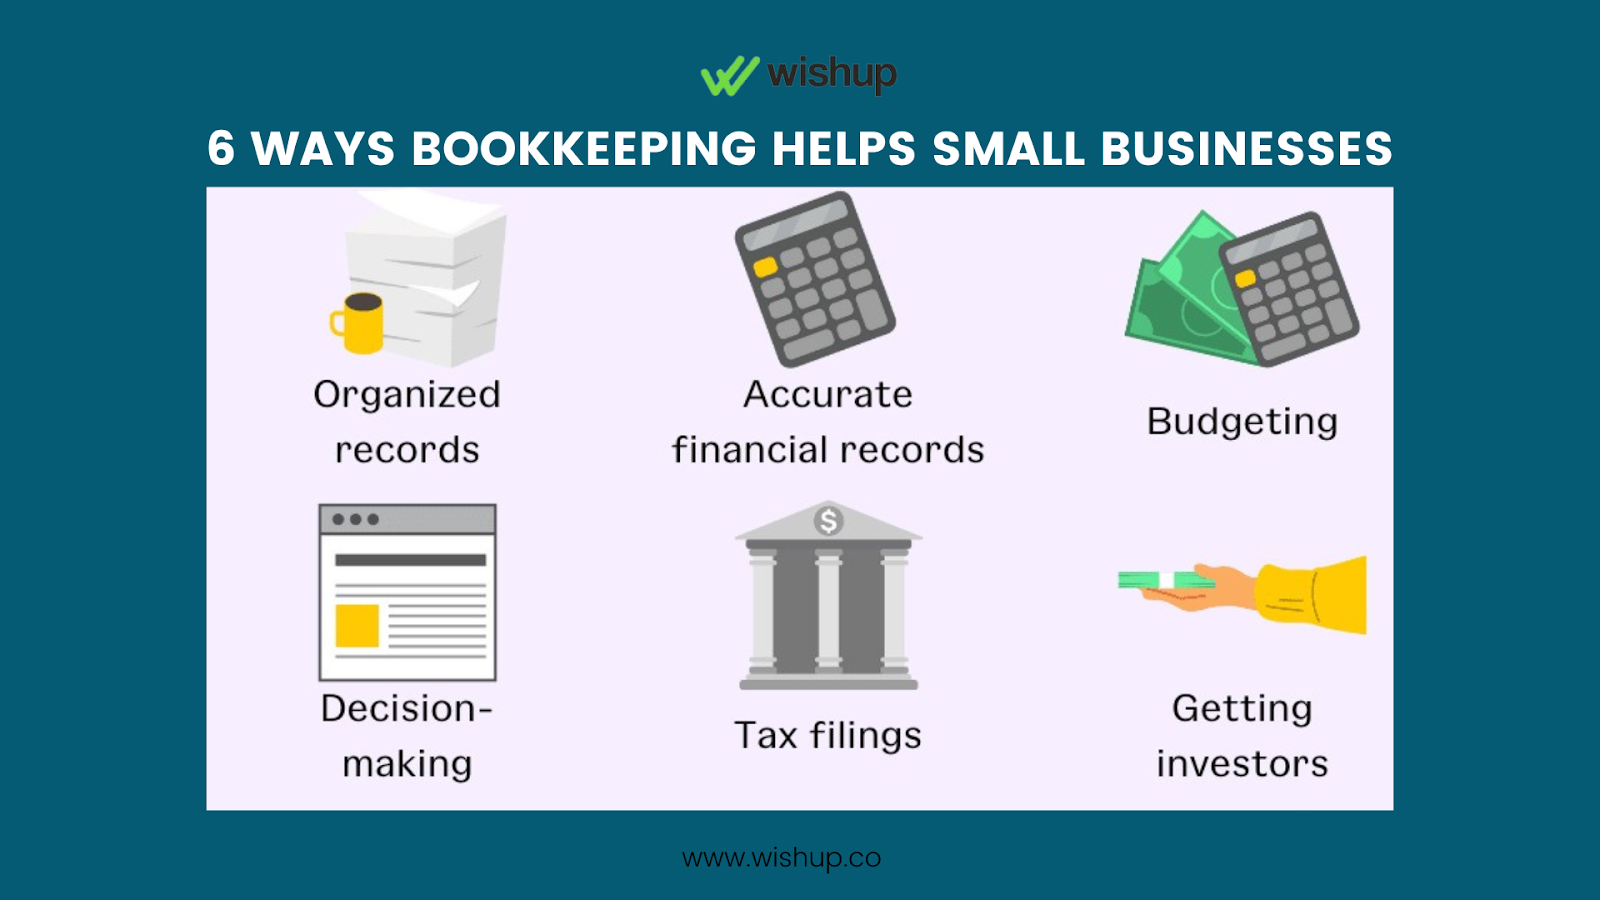 Image showing how bookkeeping can help small businesses